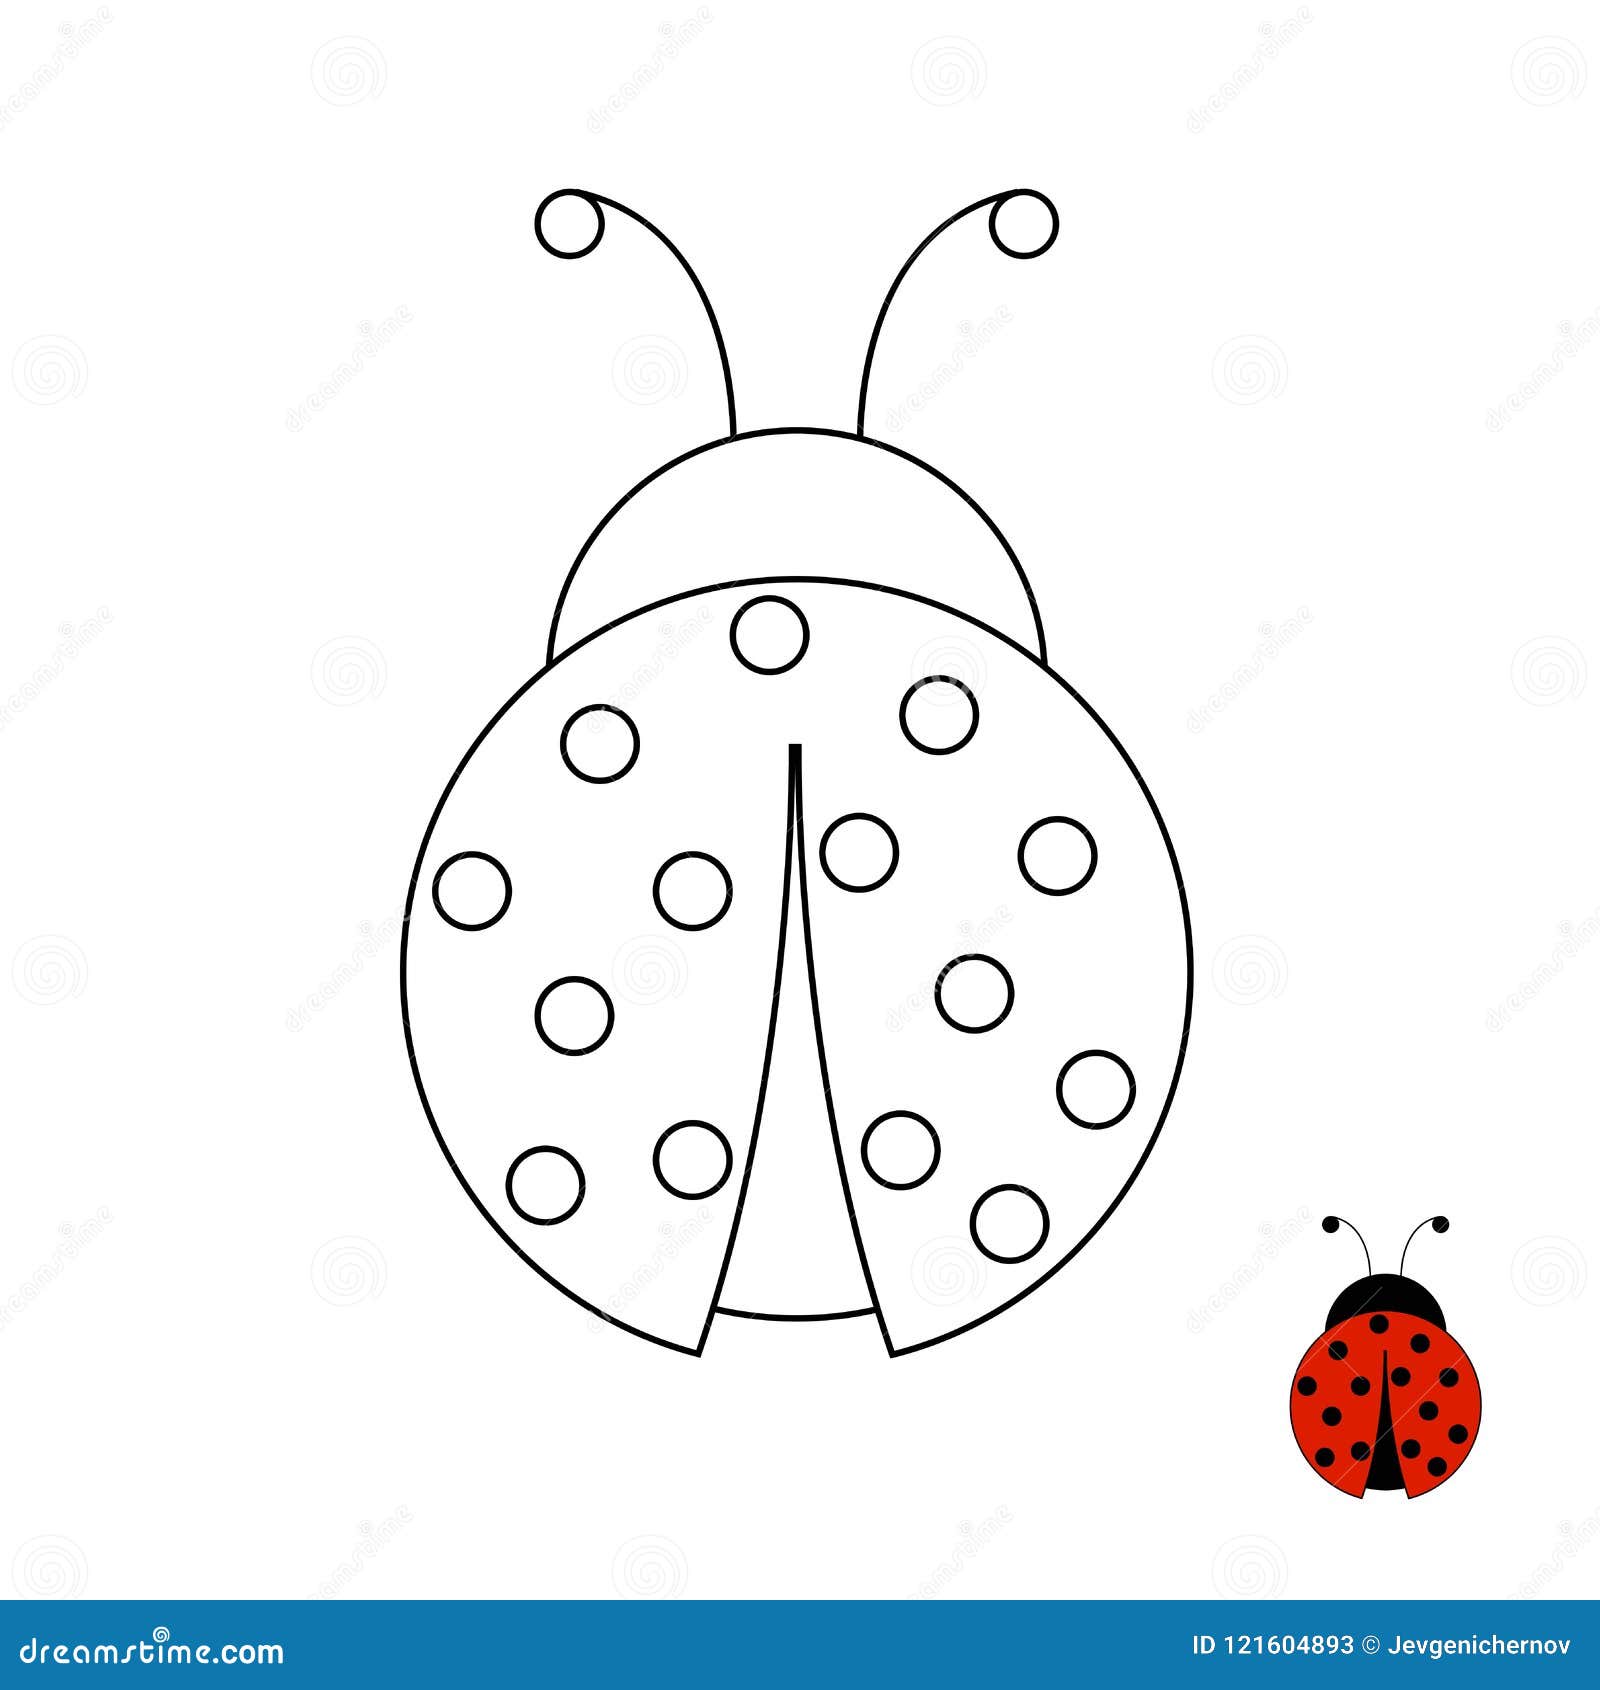 Coloring Page for Children Ladybug Stock Vector   Illustration of ...